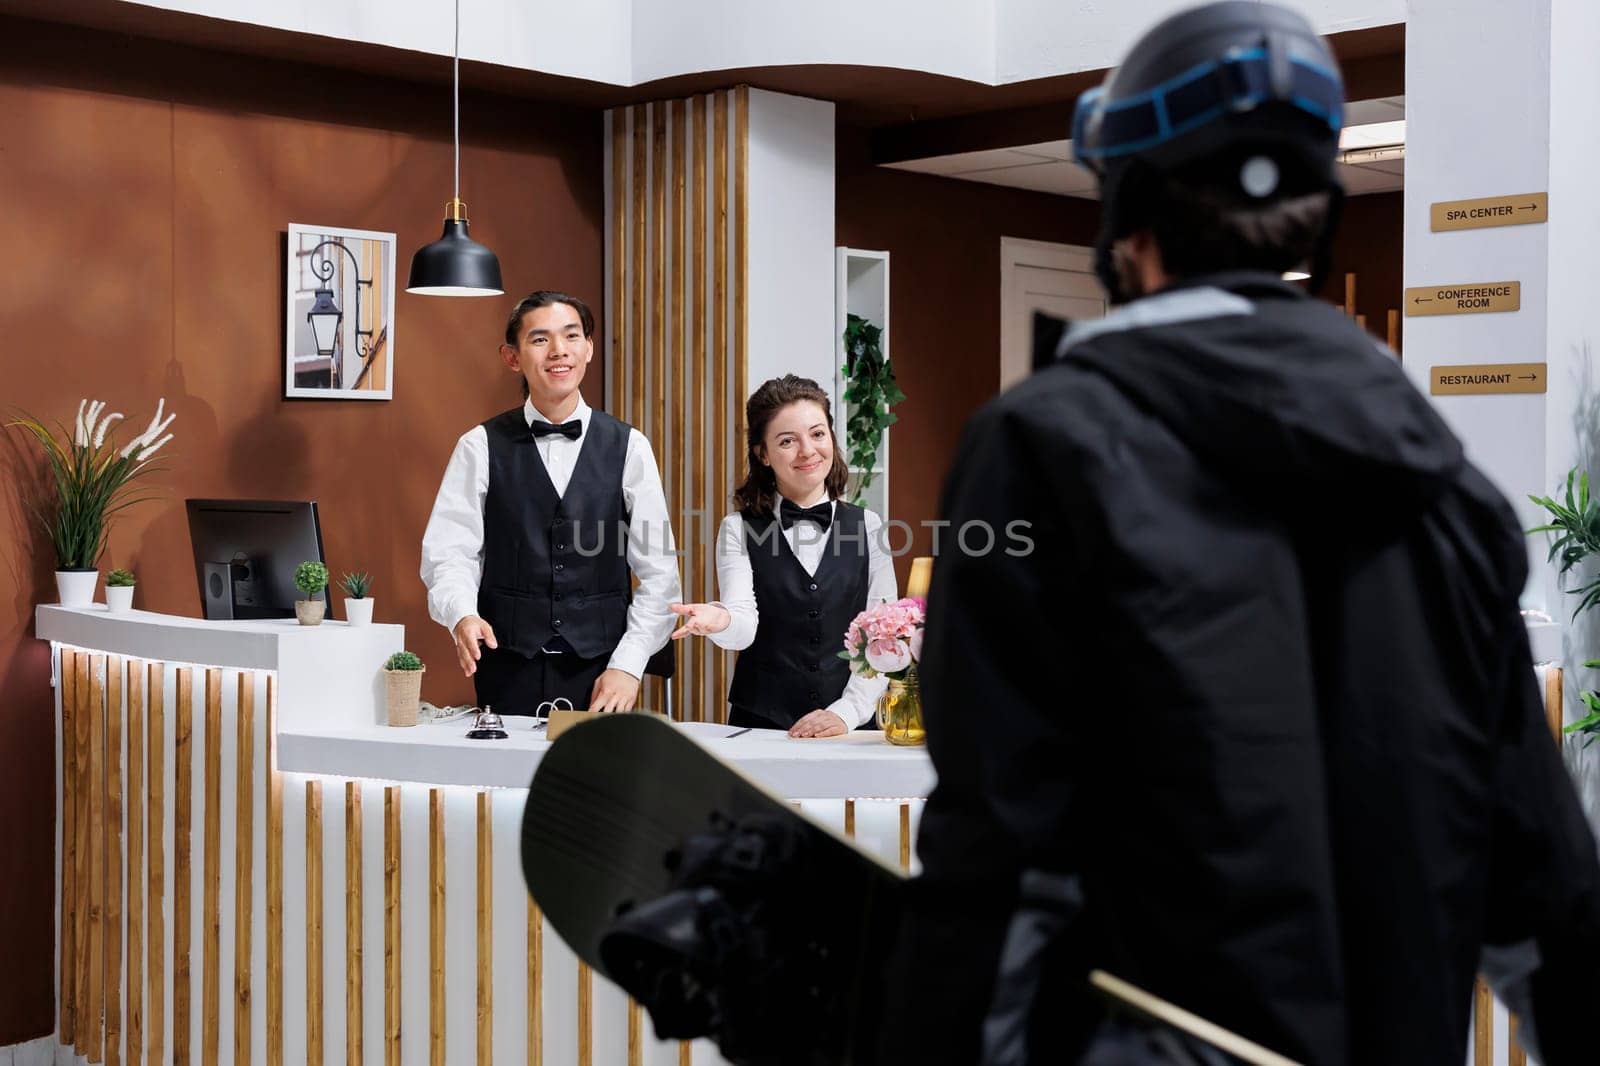 At front desk of exclusive winter resort, two receptionists warmly welcoming male guest in snow gear. Tourist wearing winter jacket and carrying snowboarding equipment arrives in hotel lobby.